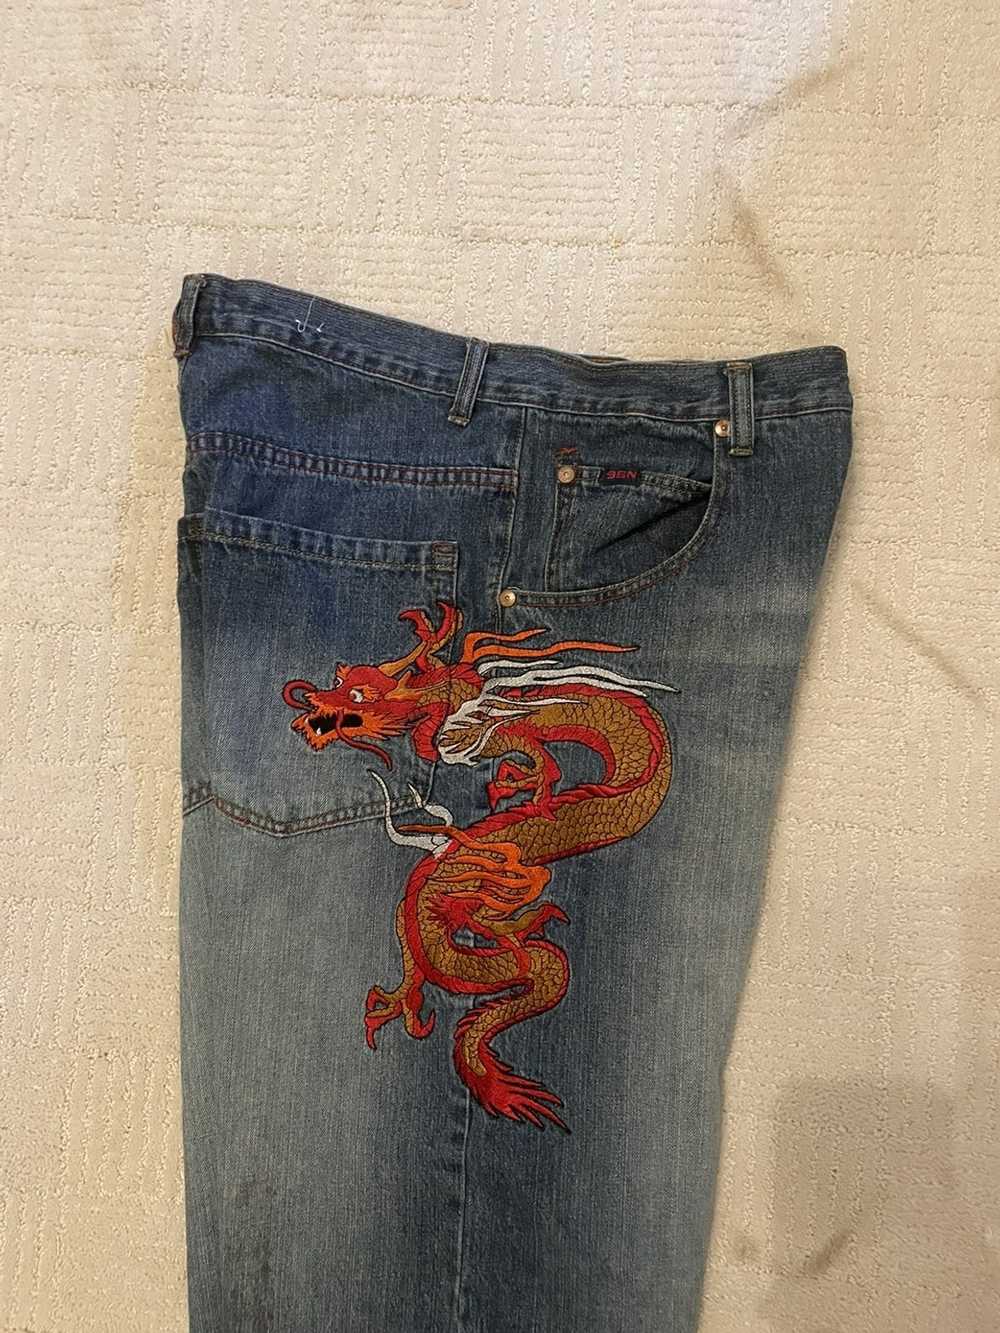 Streetwear × Vintage Dragon embroidered jeans - image 2